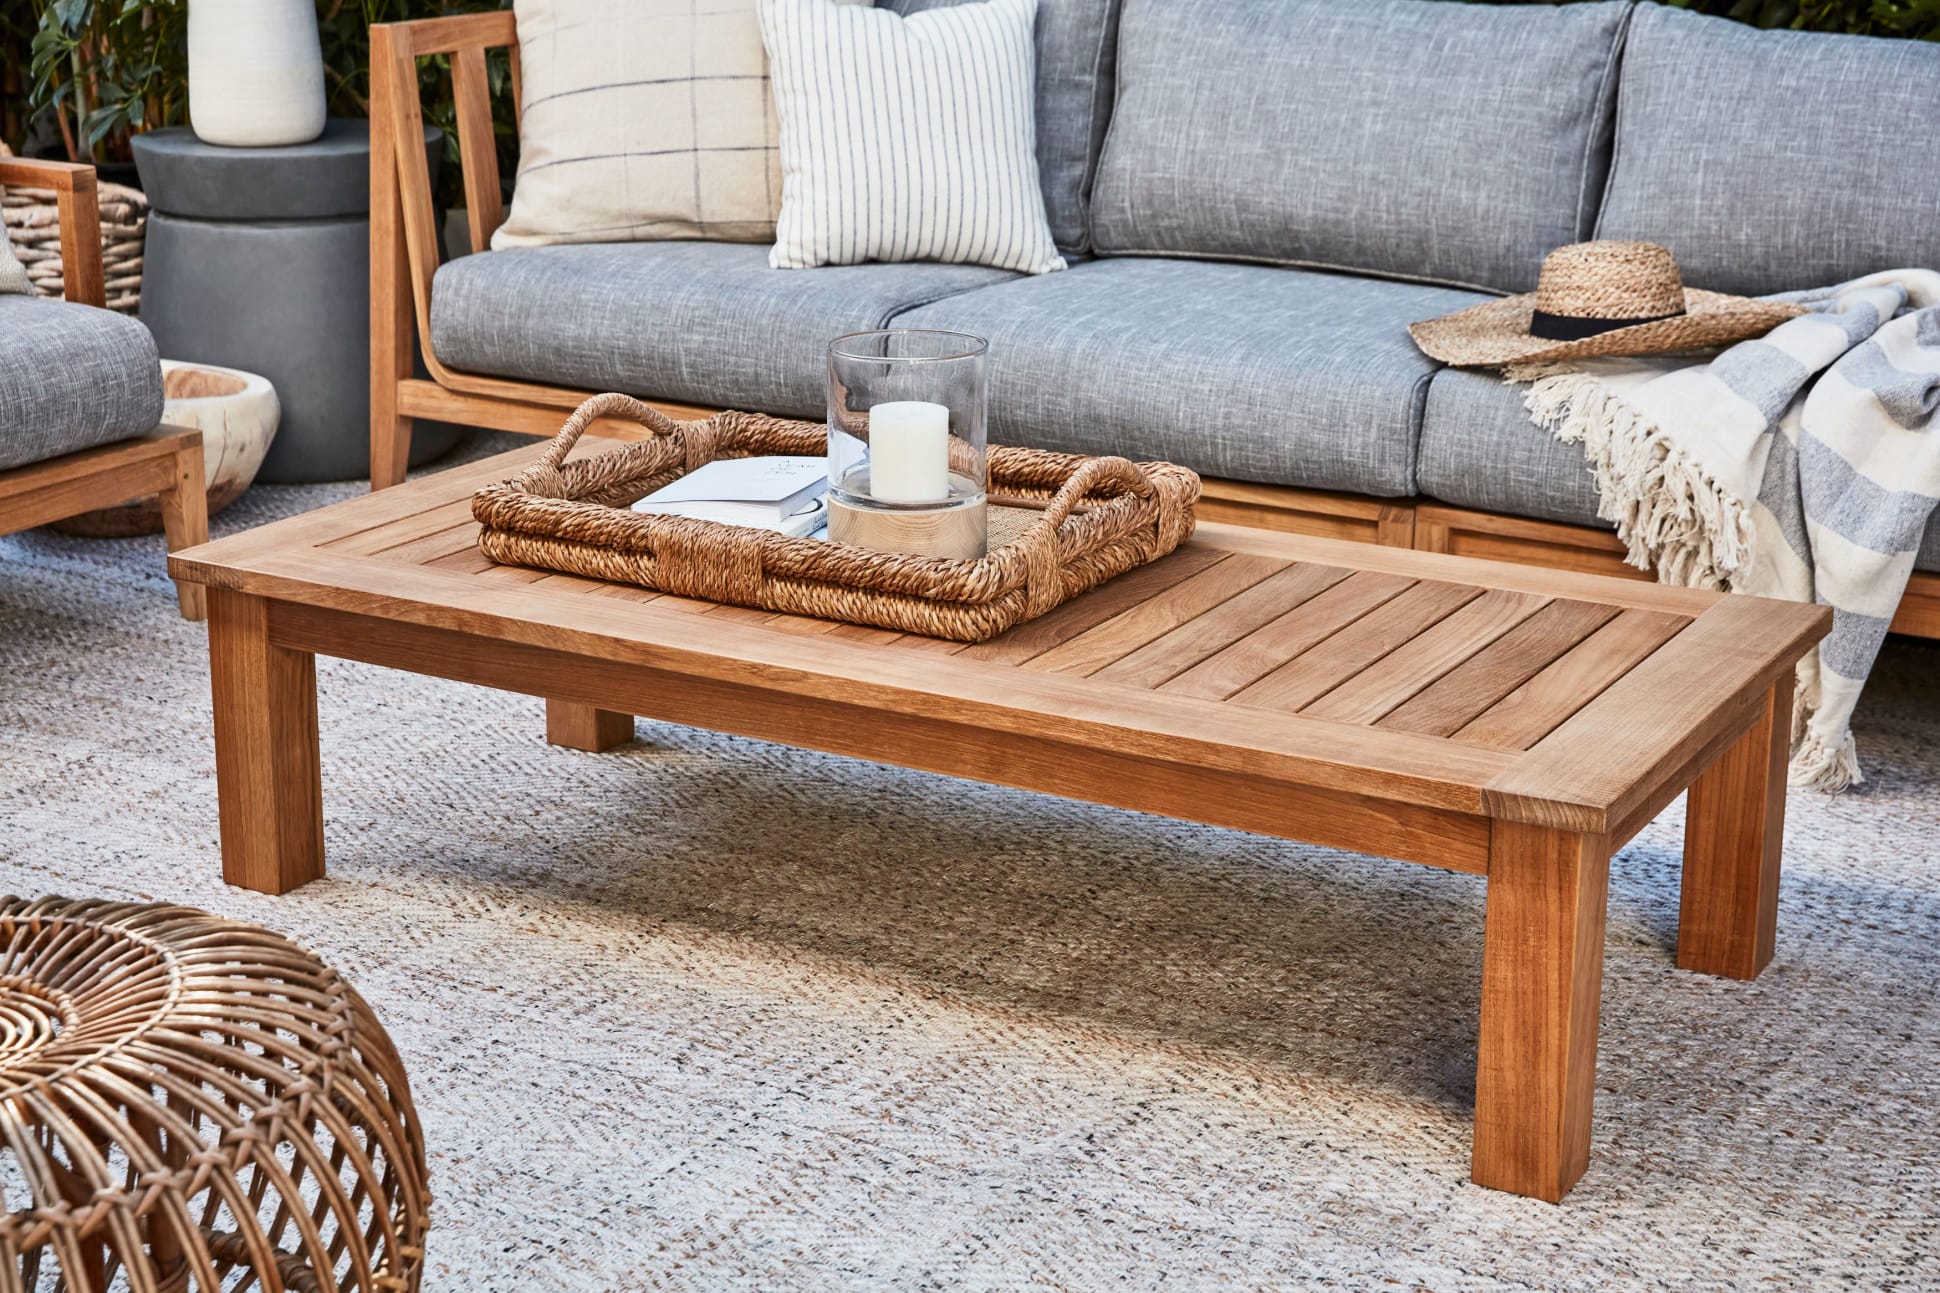 Live Outer 50" x 26" Medium Teak Outdoor Coffee Table - Square Leg